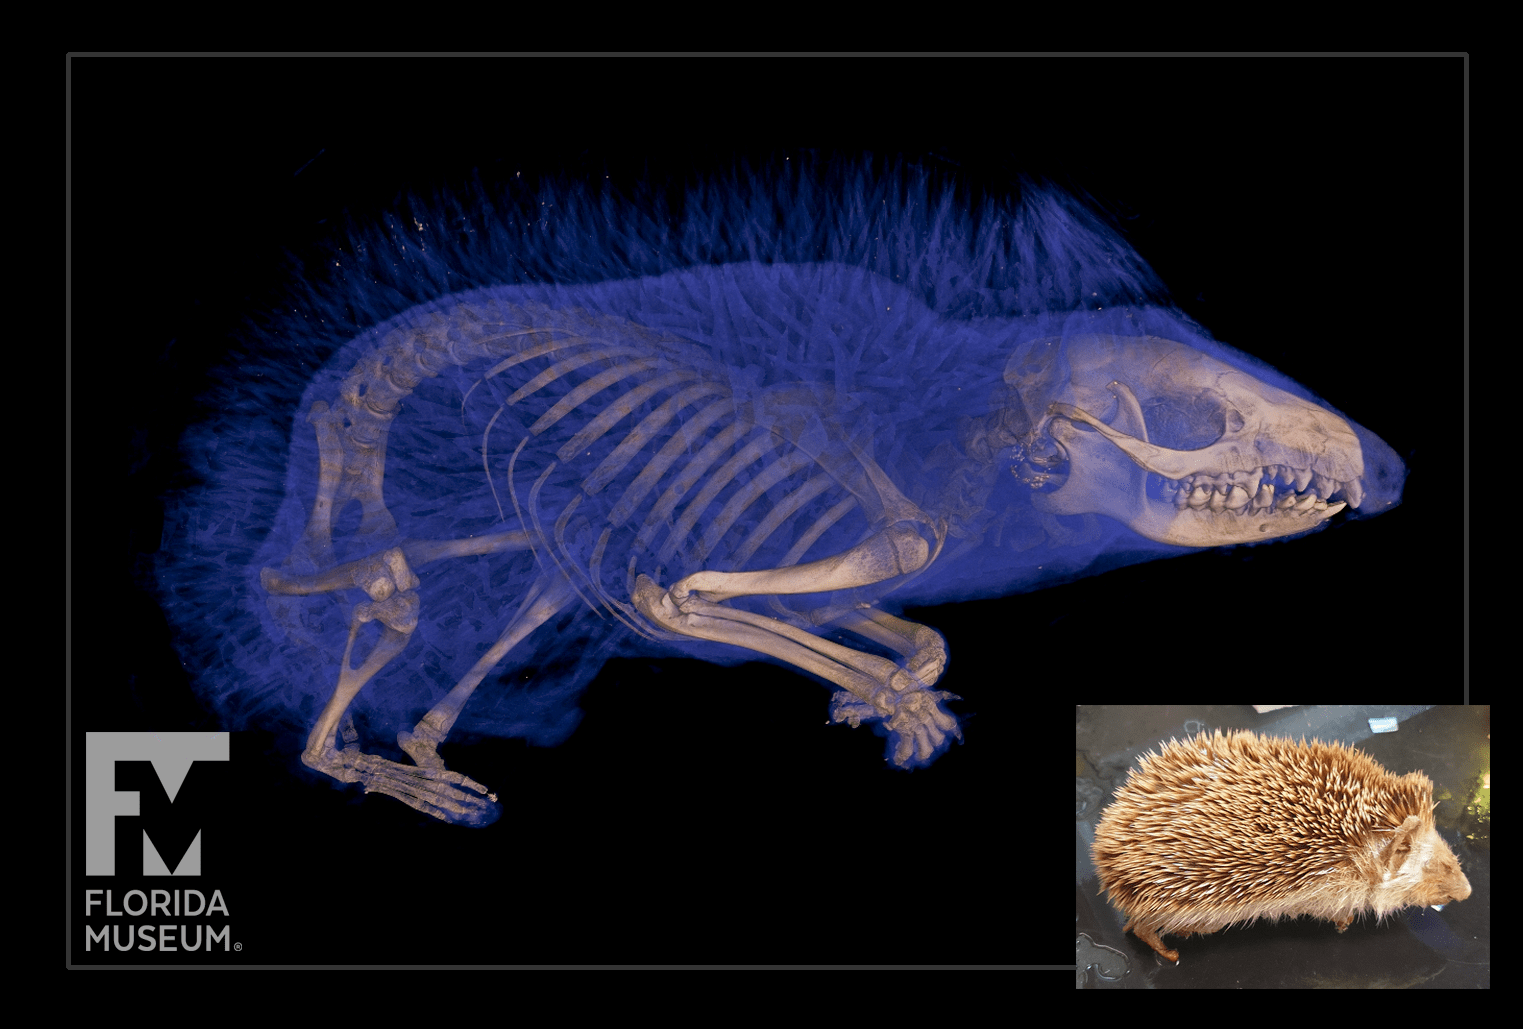 Rendering of a hedgehog CT scan, with skeleton in light brown and soft tissue in blue. An image of the fluid specimen is shown in the bottom left corner.